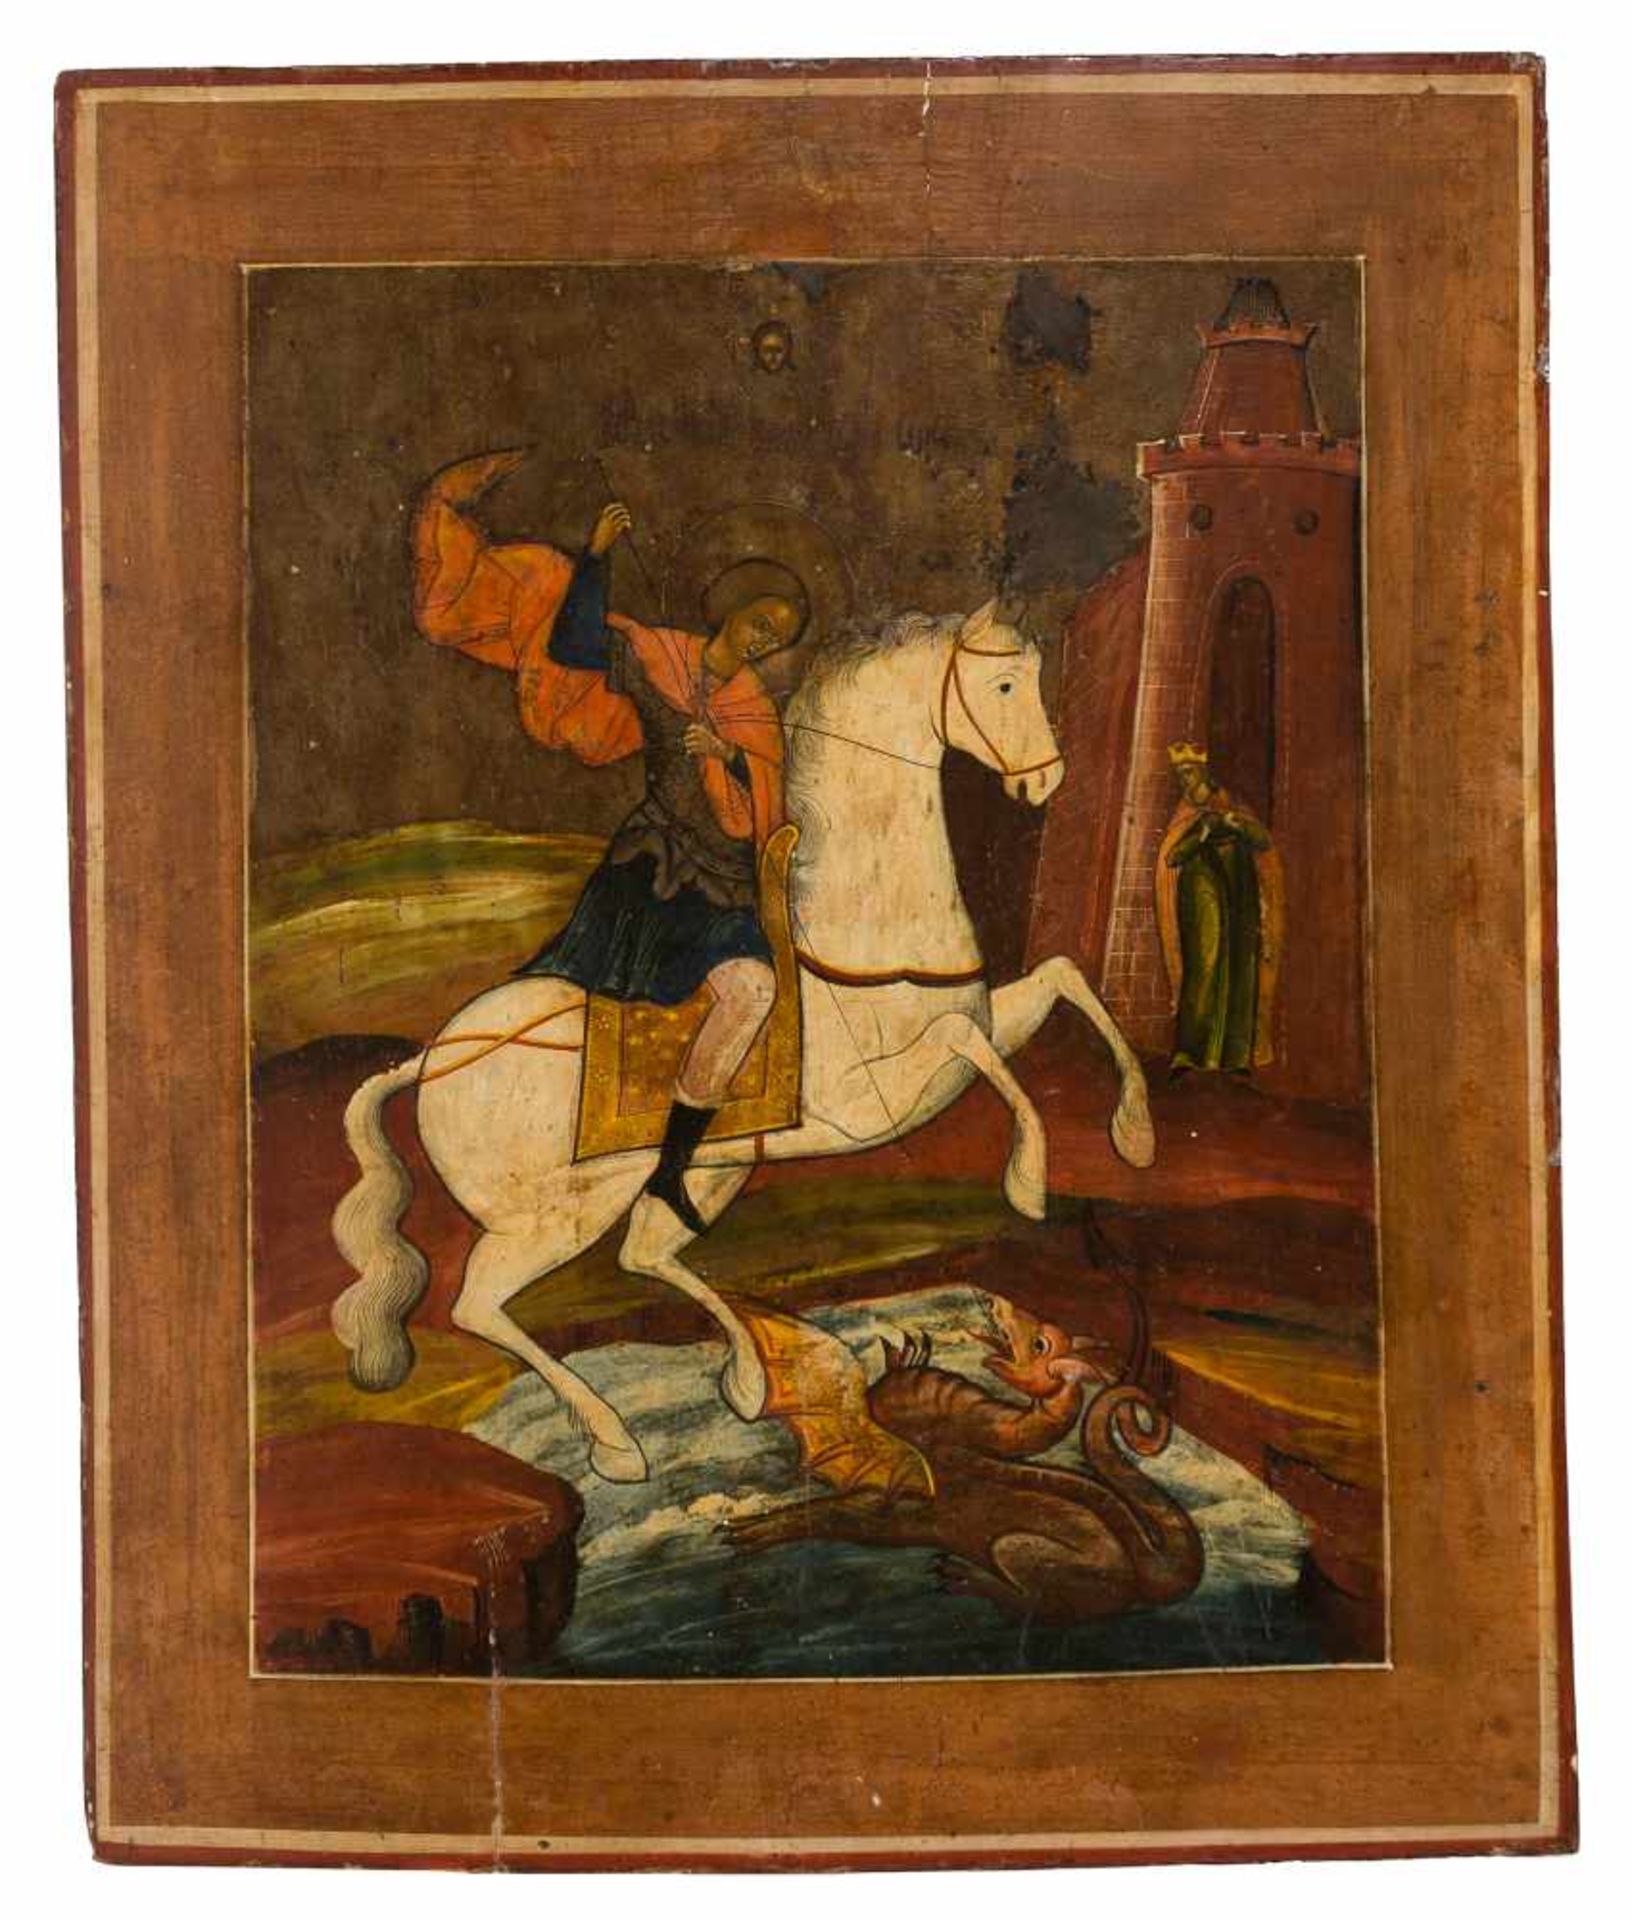 "Saint George" Large Russian icon. 19th century. In the style of Palekh.54 x 44 cm.- - -22.00 %